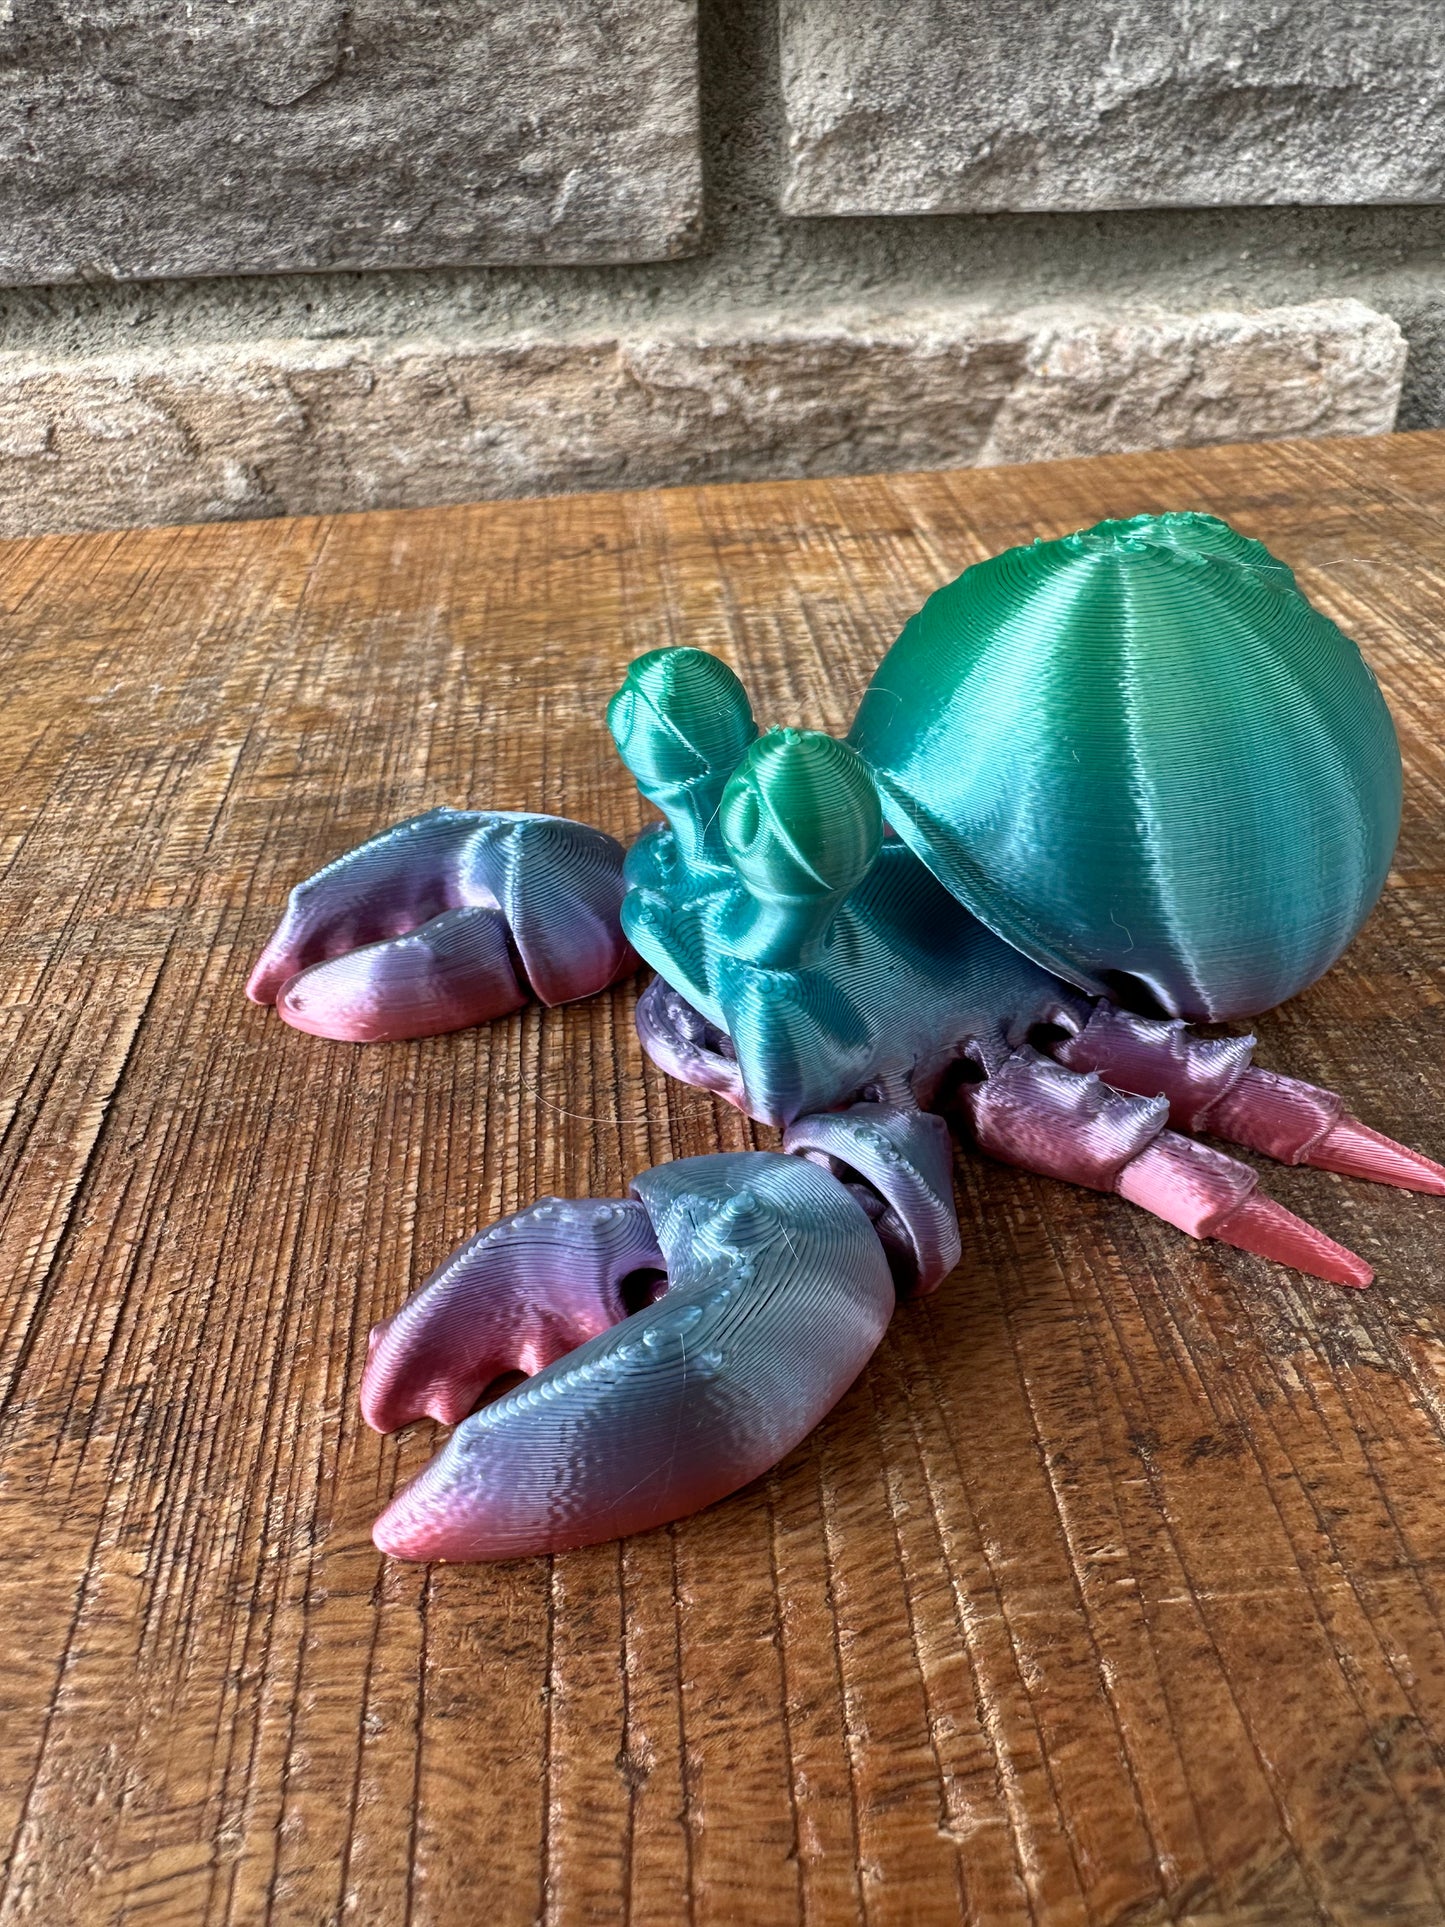 Hermit Crab | Male | 3d Printed | Custom Articulated Flexible Toy